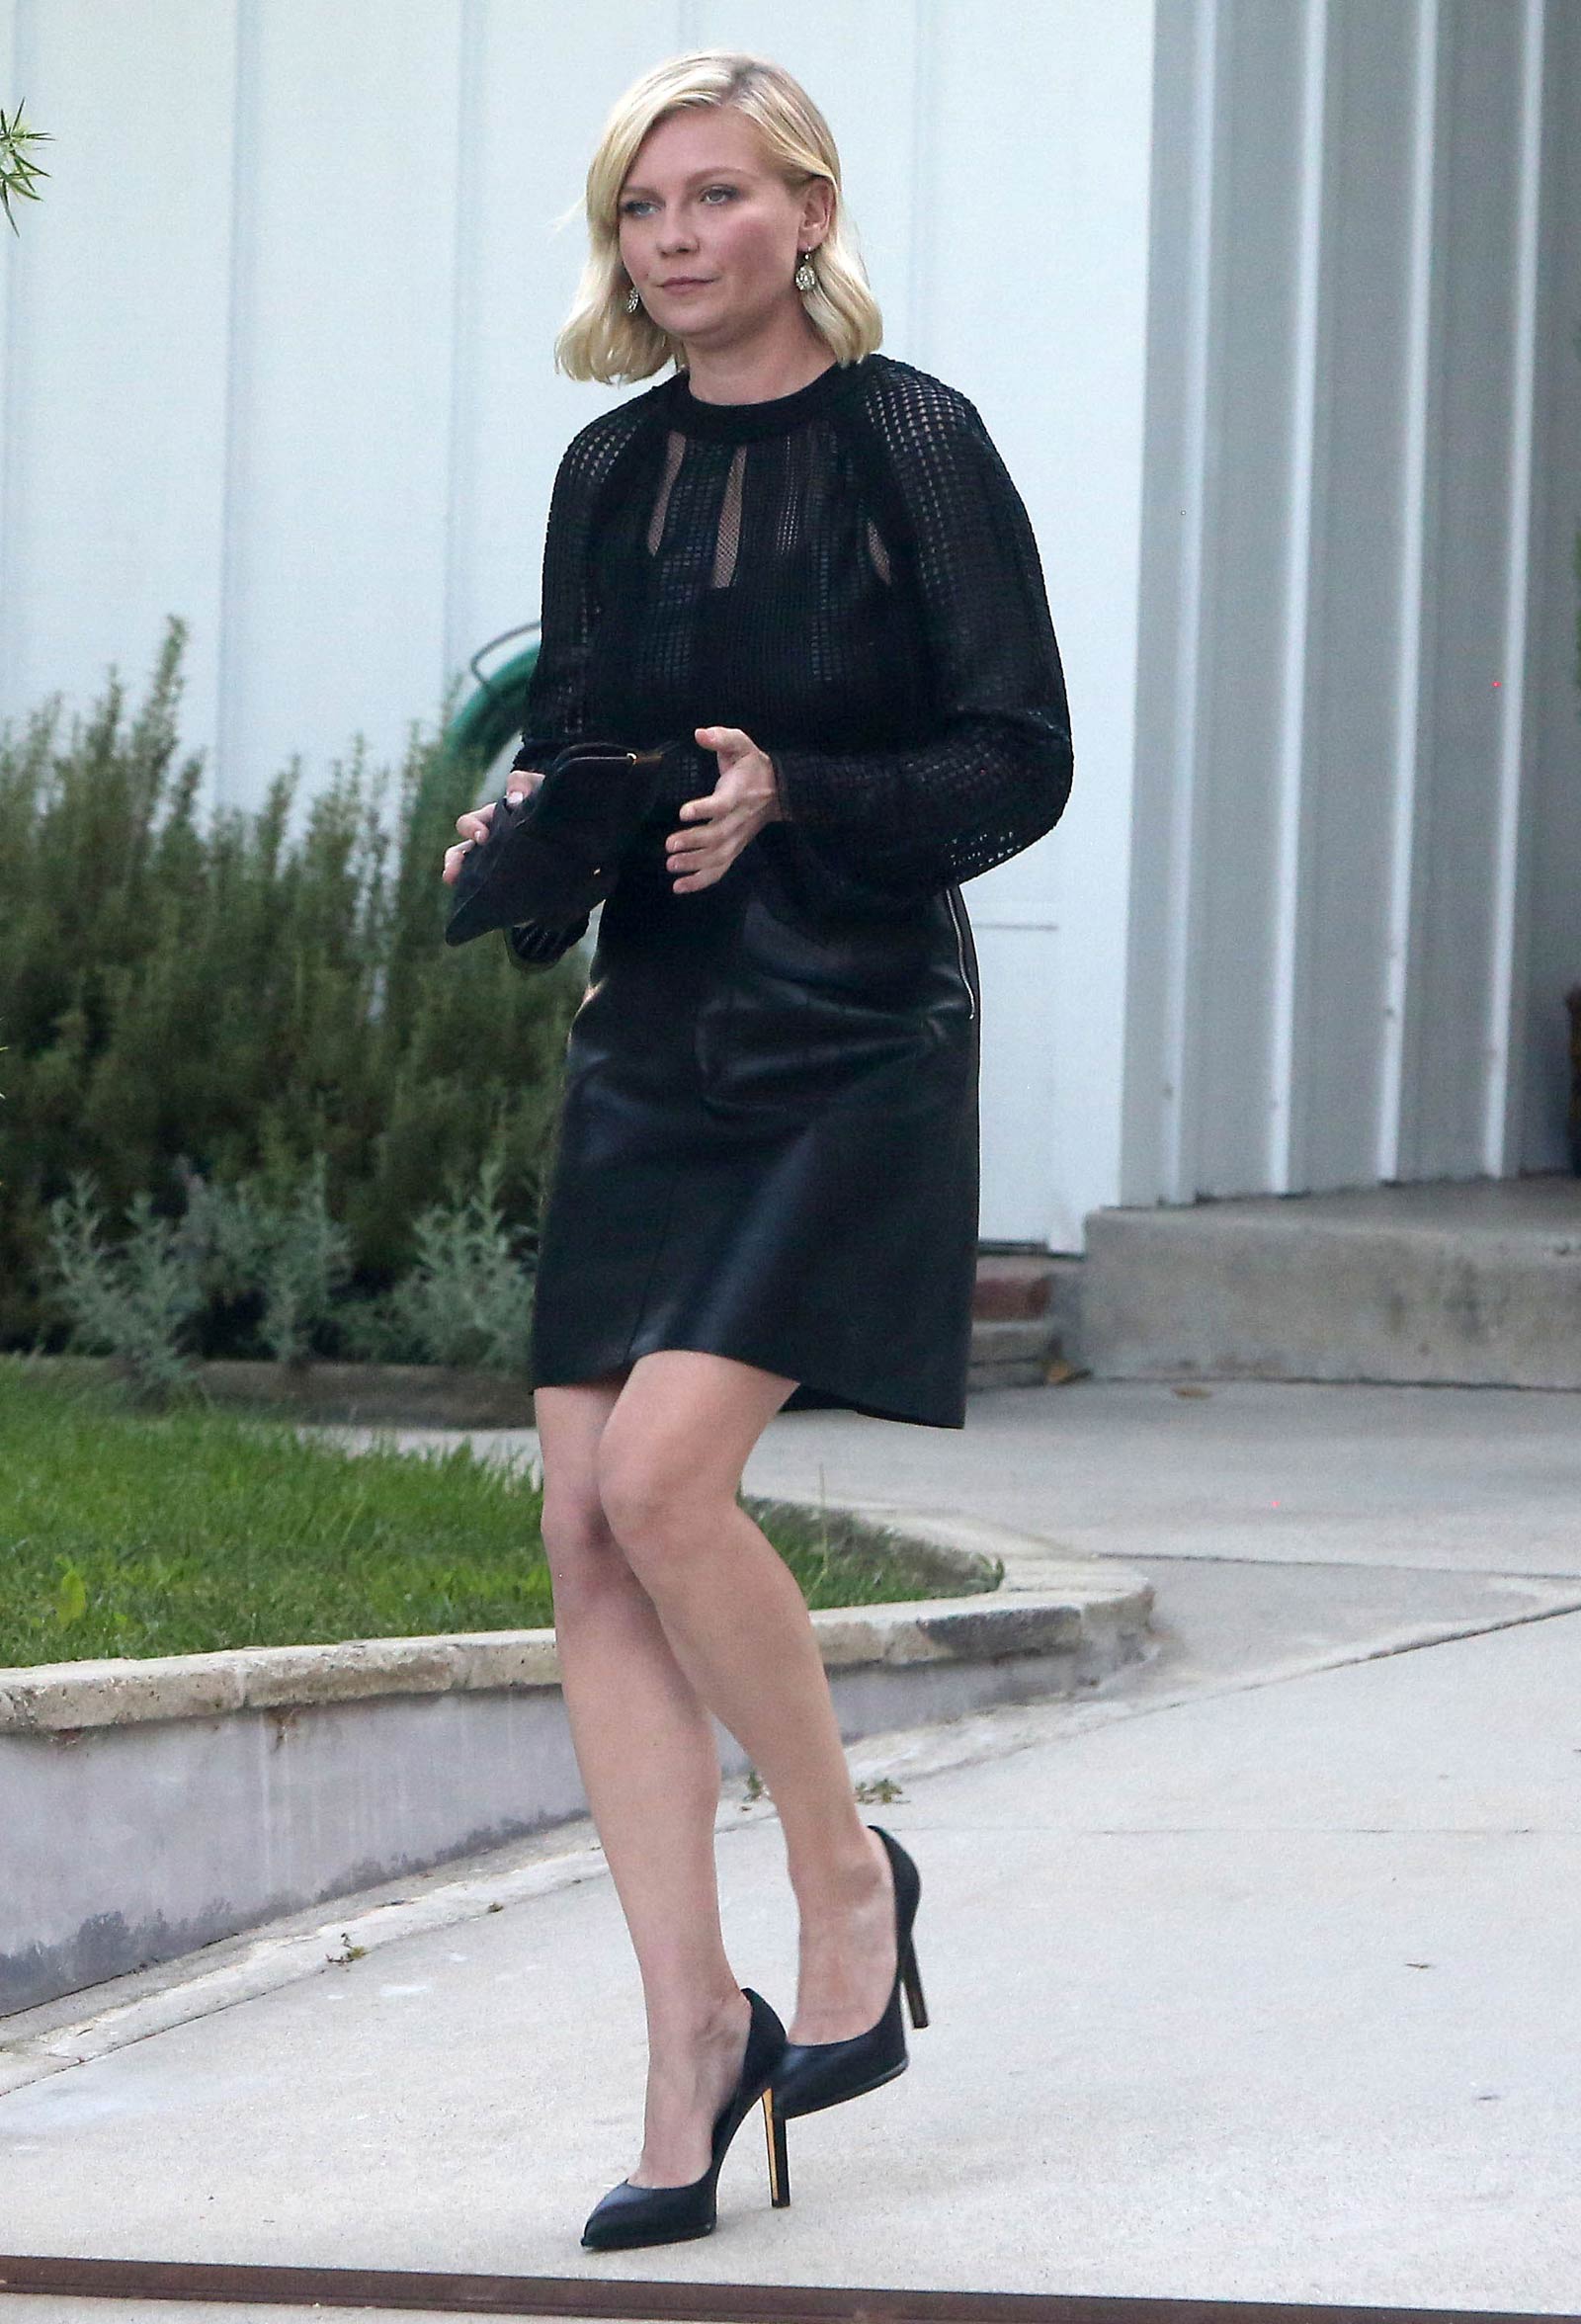 Kirsten Dunst getting into a limo outside her house